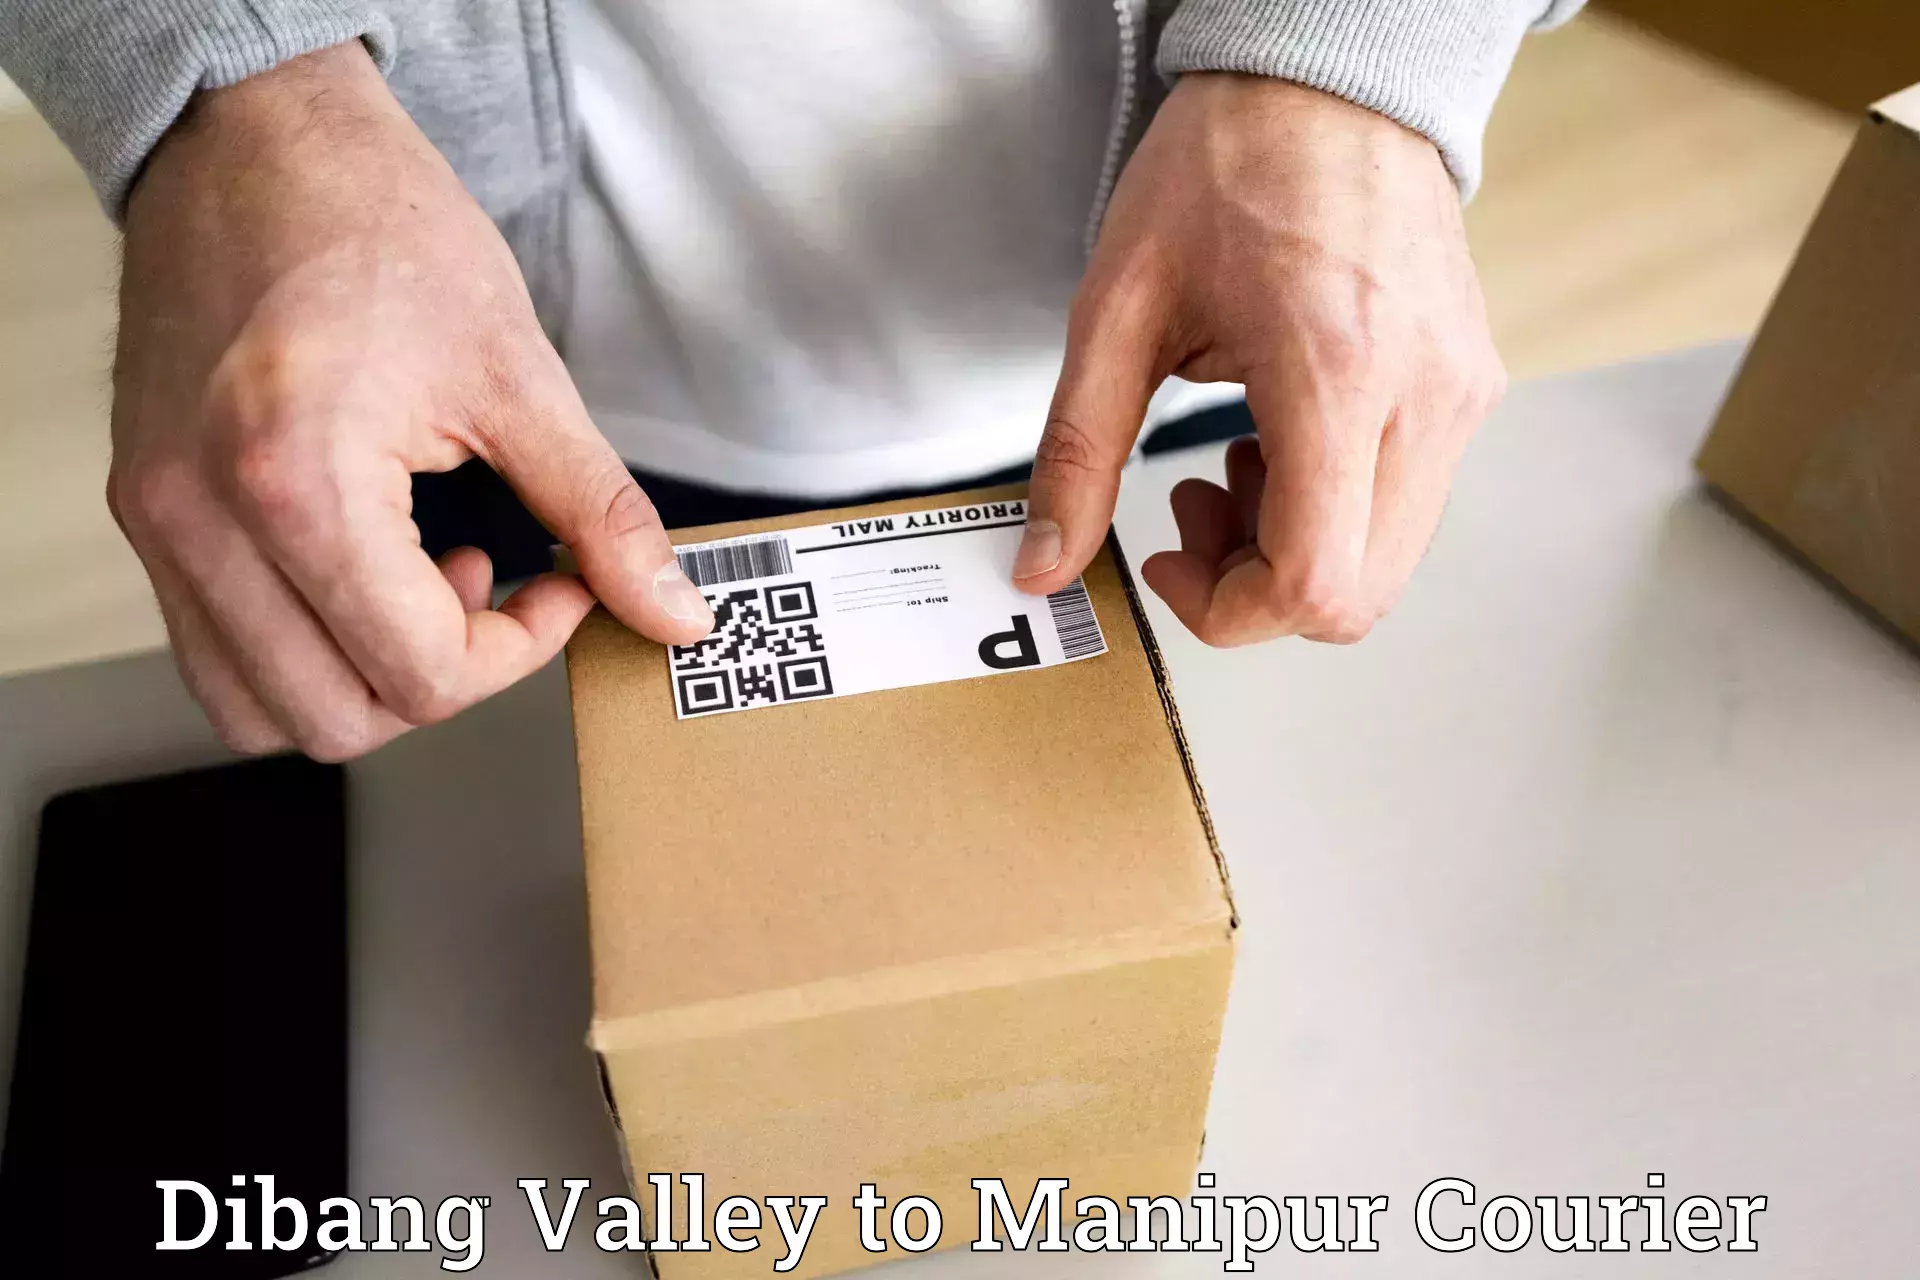 Express logistics providers Dibang Valley to Manipur